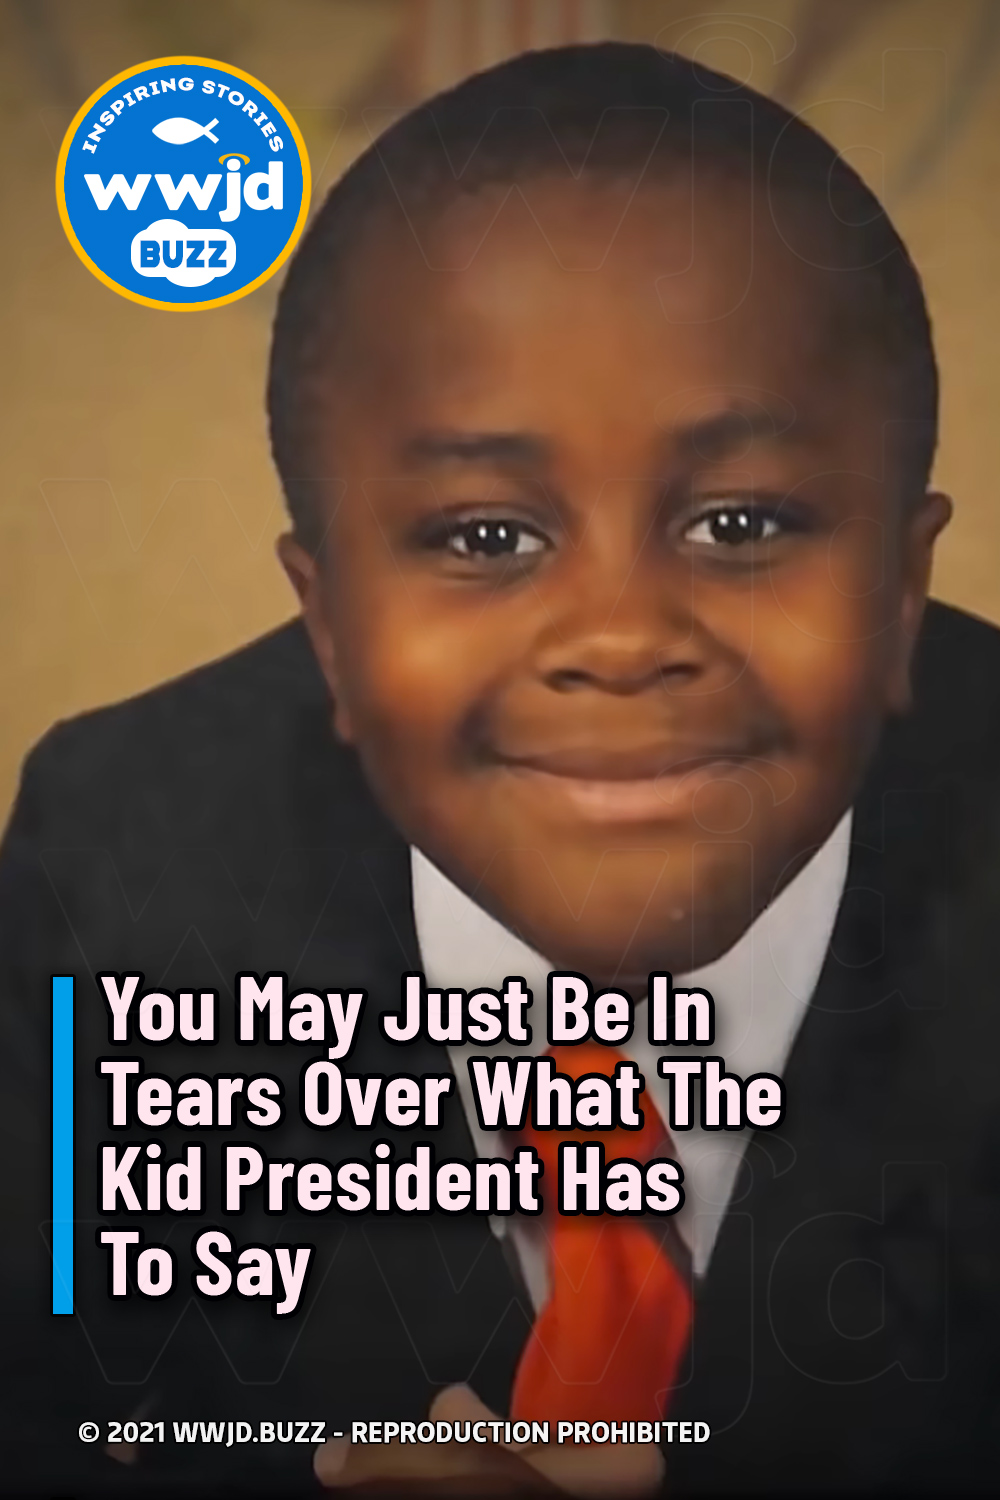 You May Just Be In Tears Over What The Kid President Has To Say